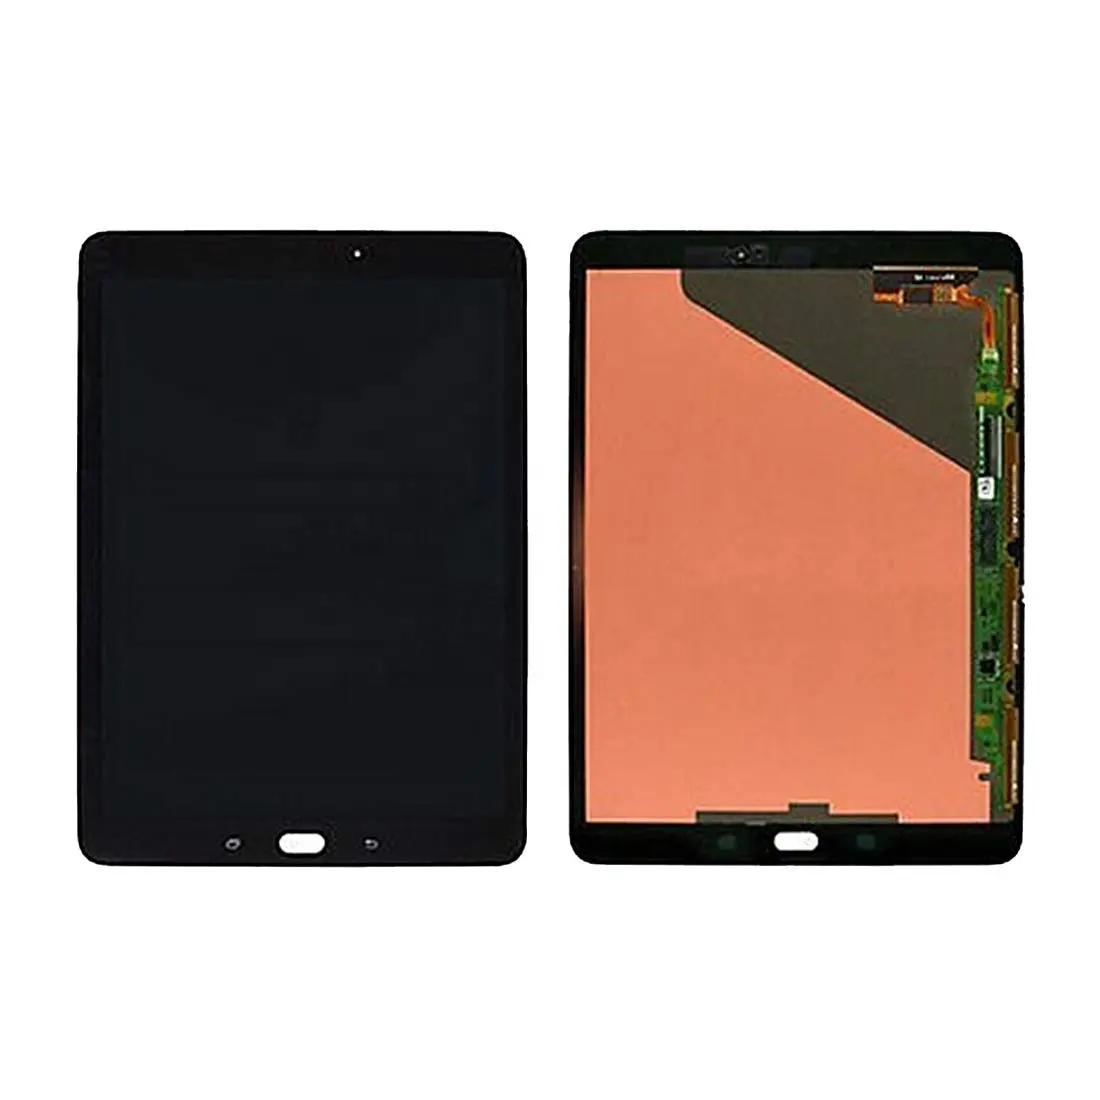 Display digitalizzatore LCD per Samsung Galaxy Tab S2 9.7 pollici SM-T810 T815 SM T810 T813 Tablet Touch Screen Assembly